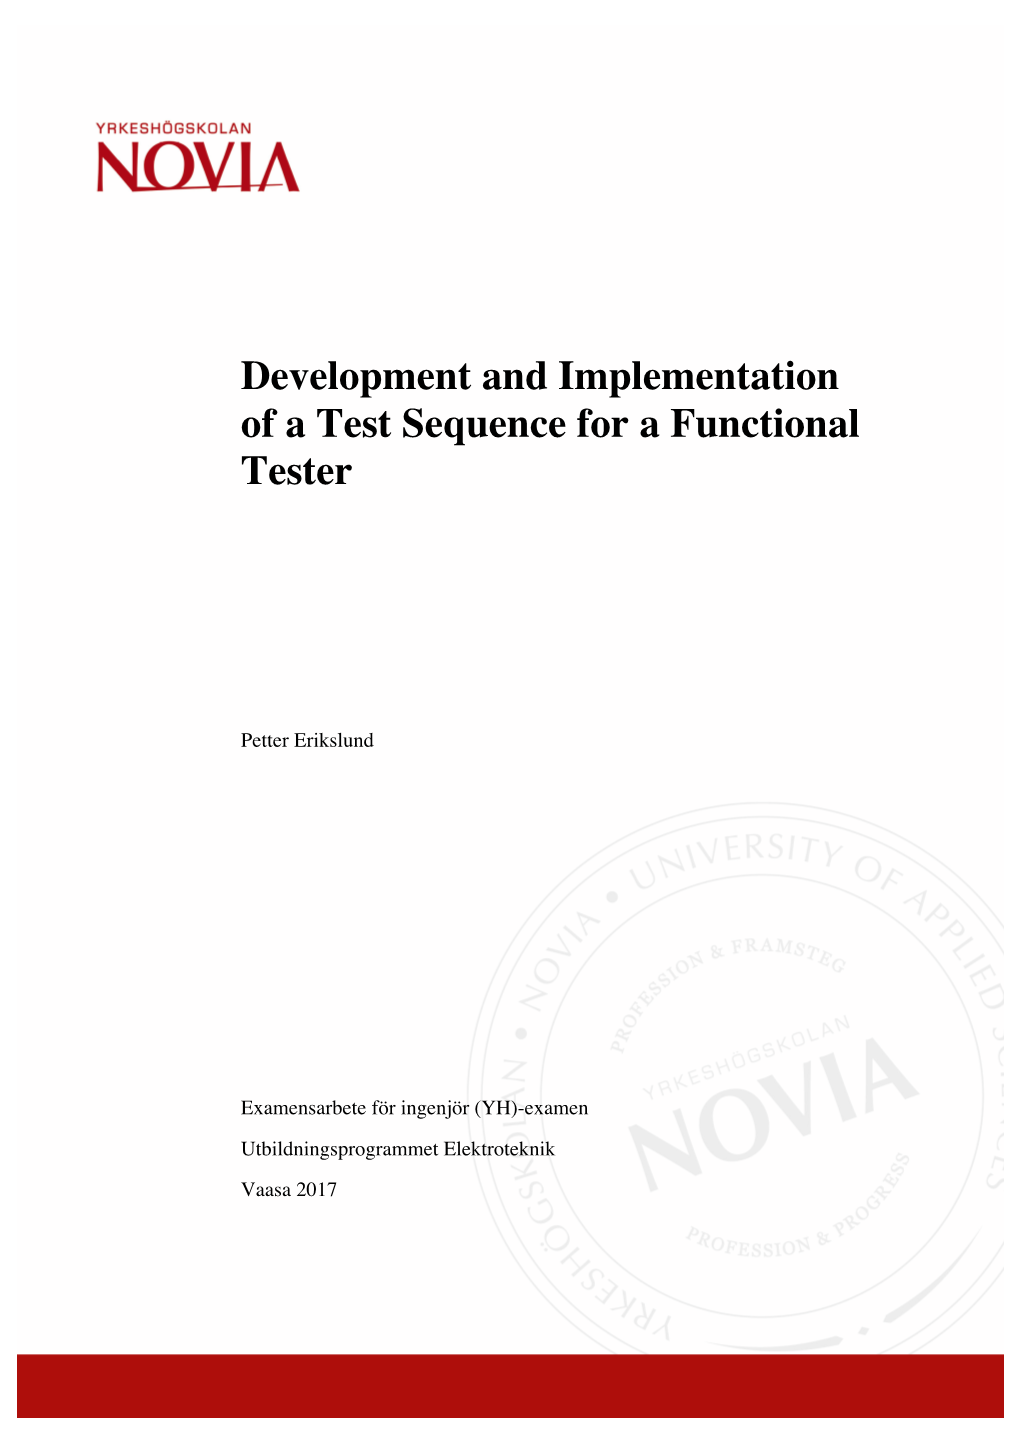 Development and Implementation of a Test Sequence for a Functional Tester